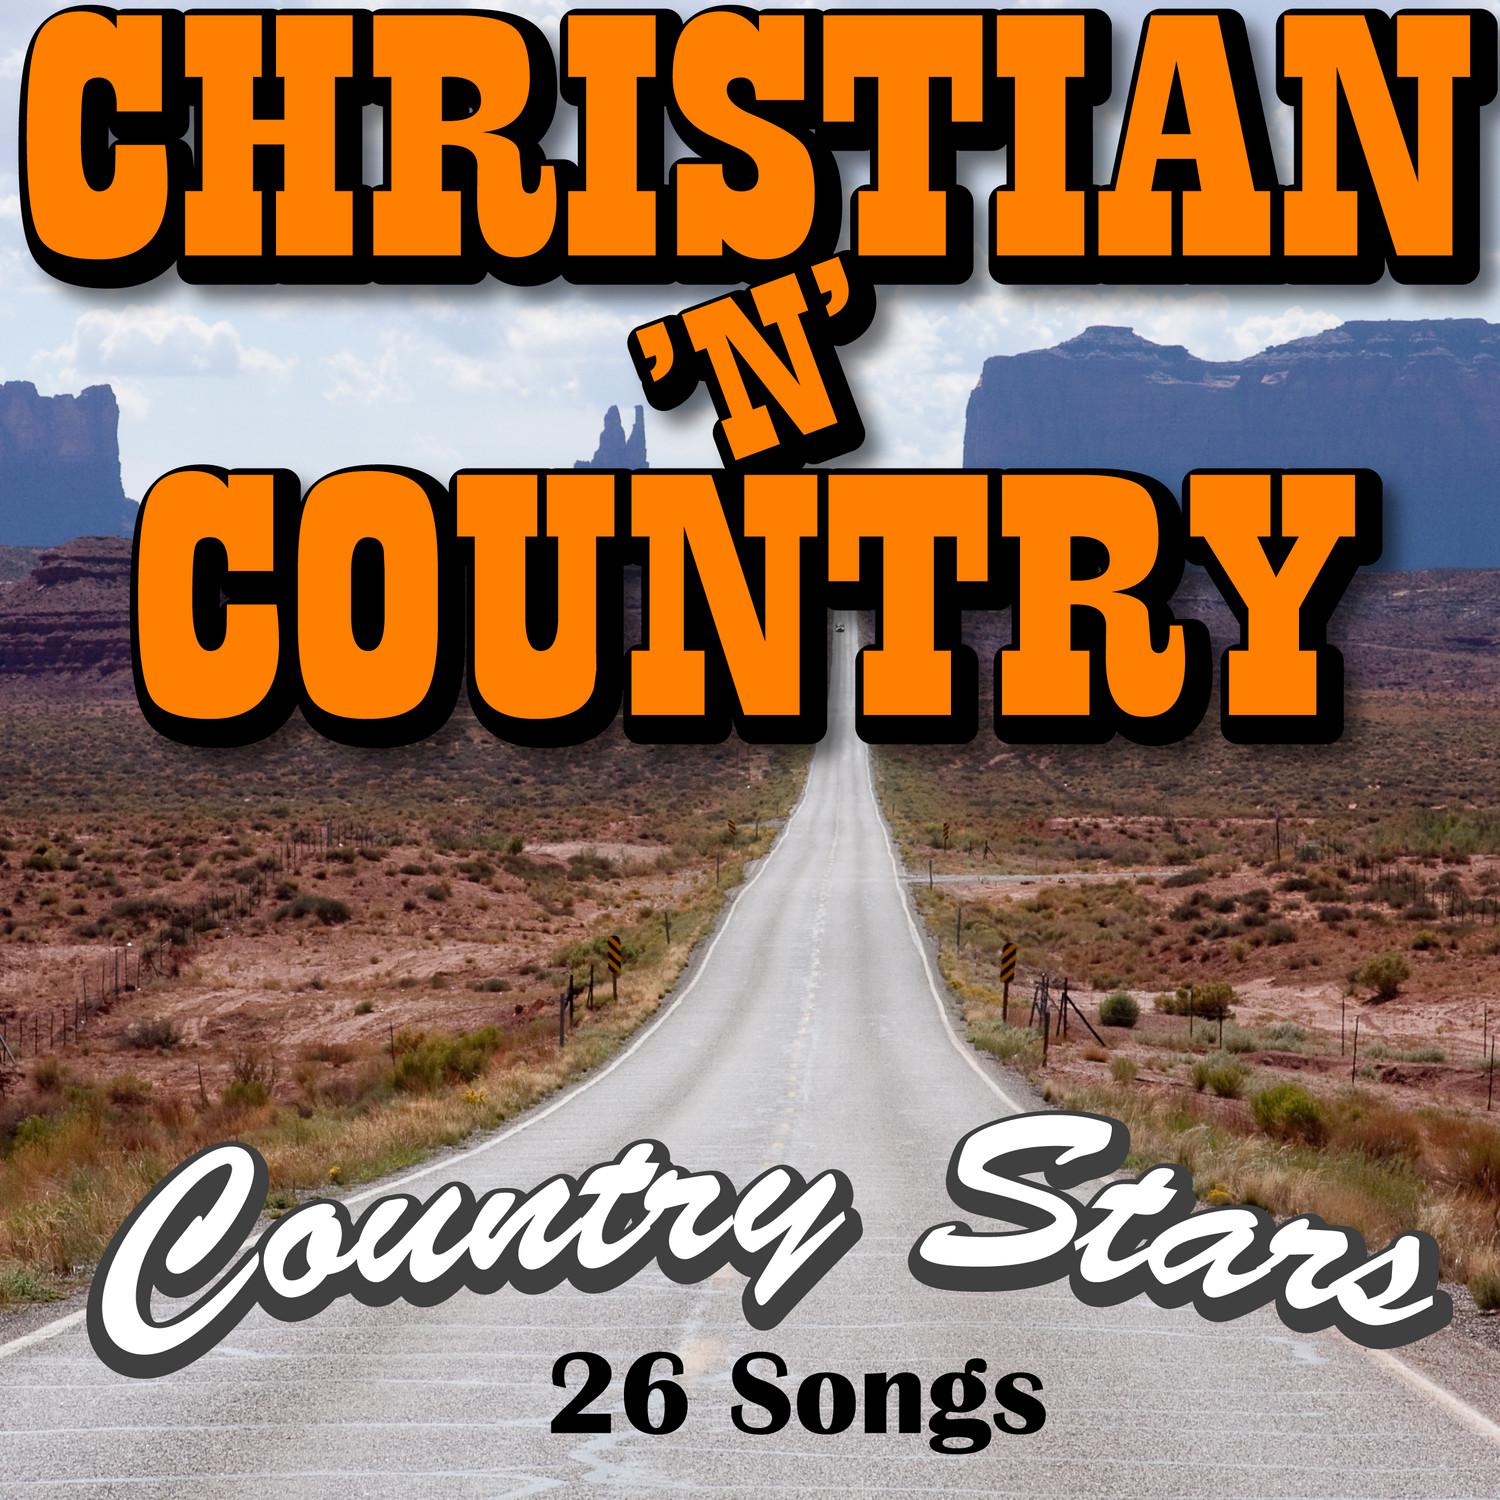 Country Stars - Christian 'n' Country